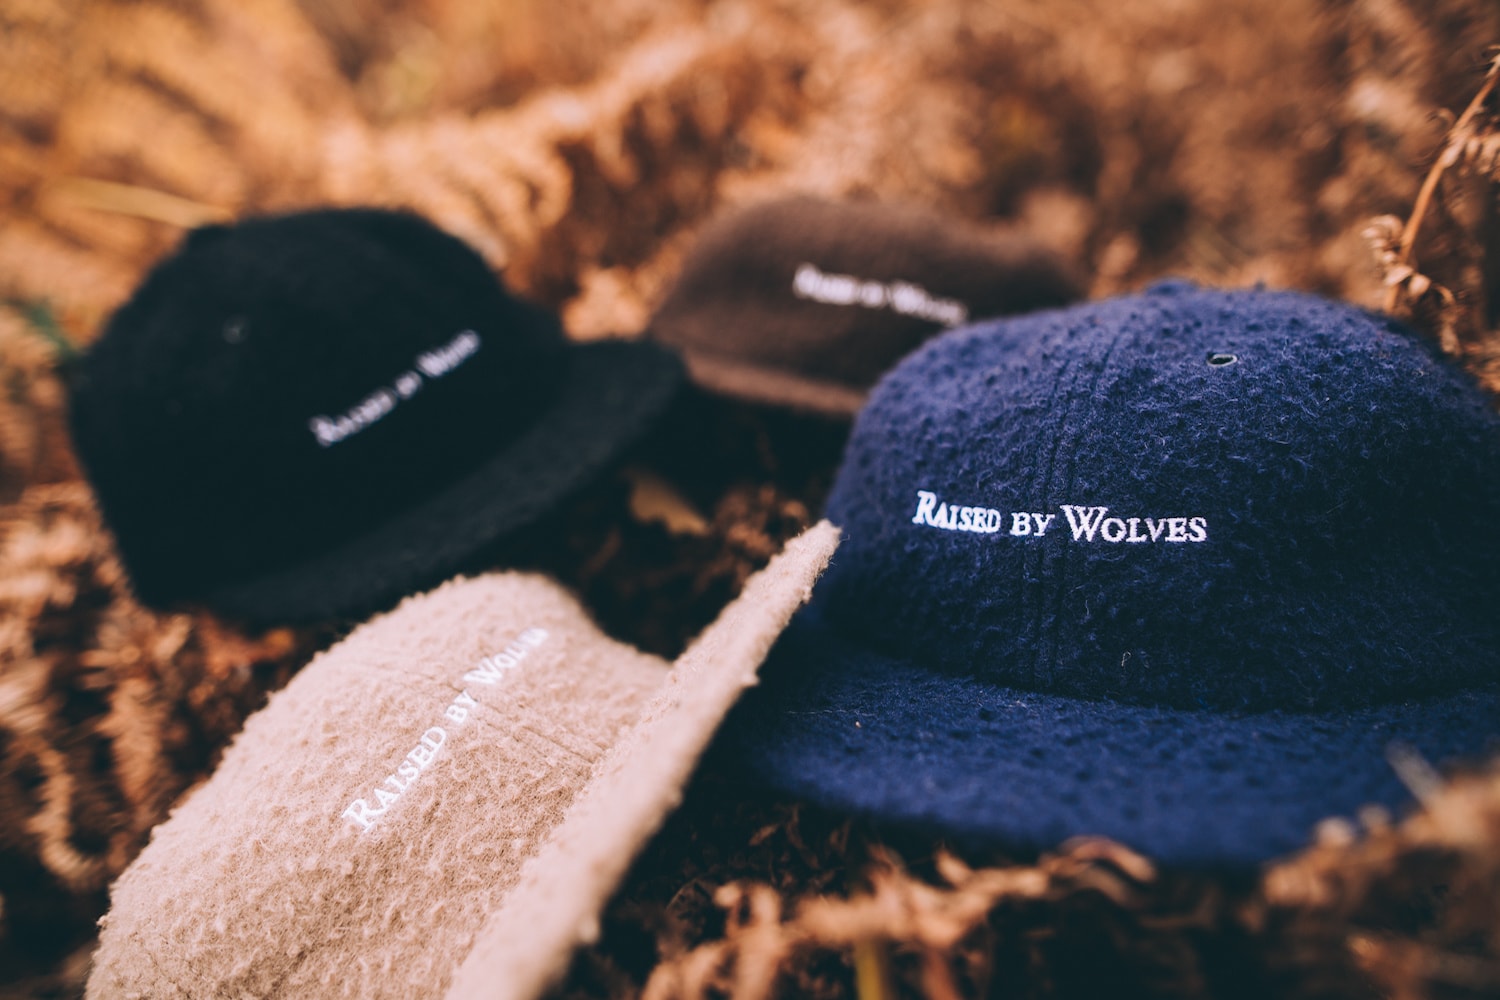 Raised by Wolves 2016 Holiday Collection